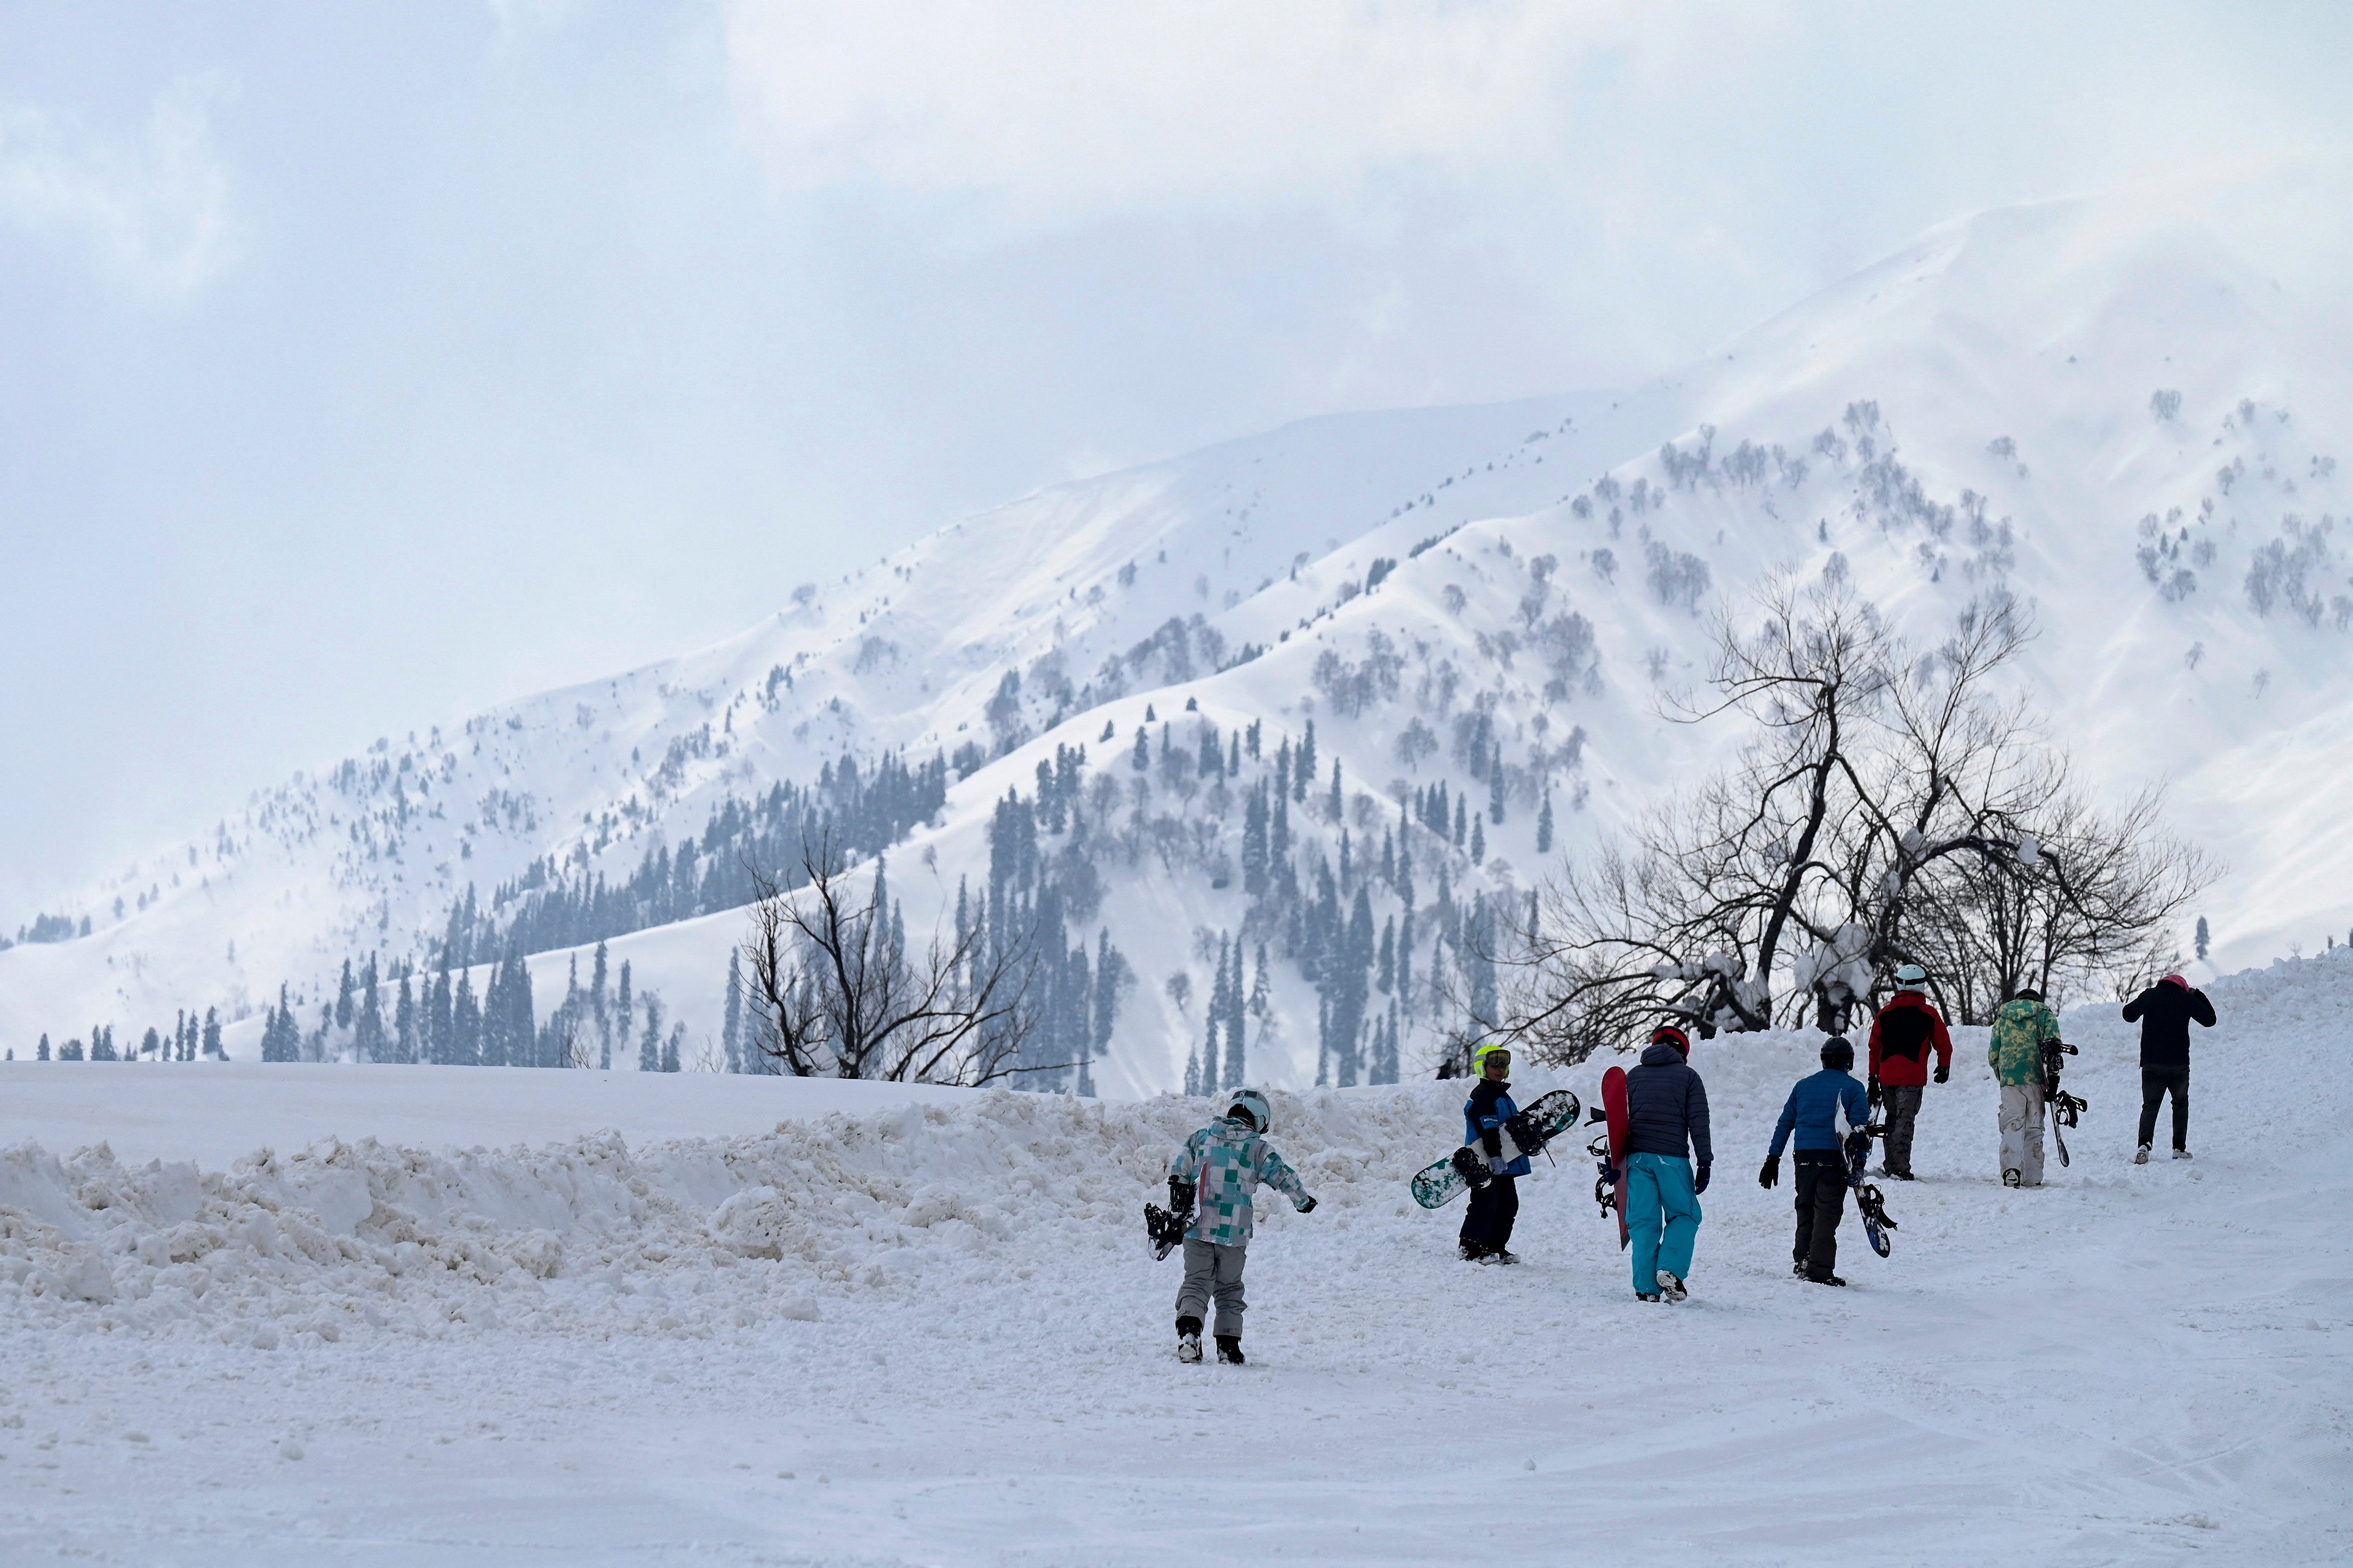 Participants walk during the opening ceremony of Khelo India Winter Games at a ski resort in Gulmarg north of Srinagar on February 10, 2023